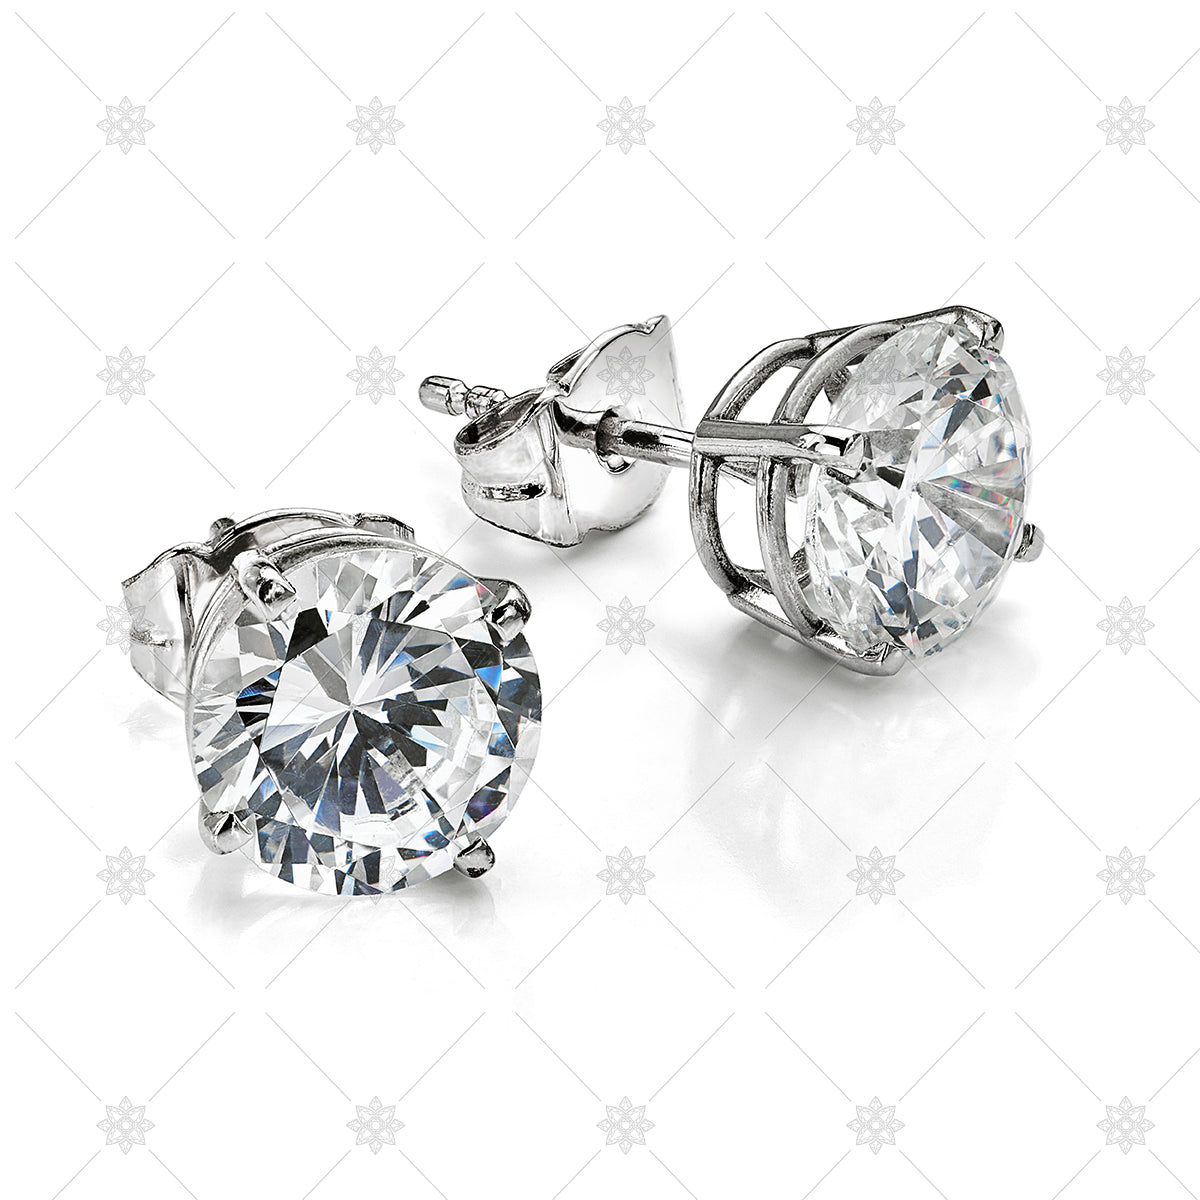 Solitaire earrings in white gold